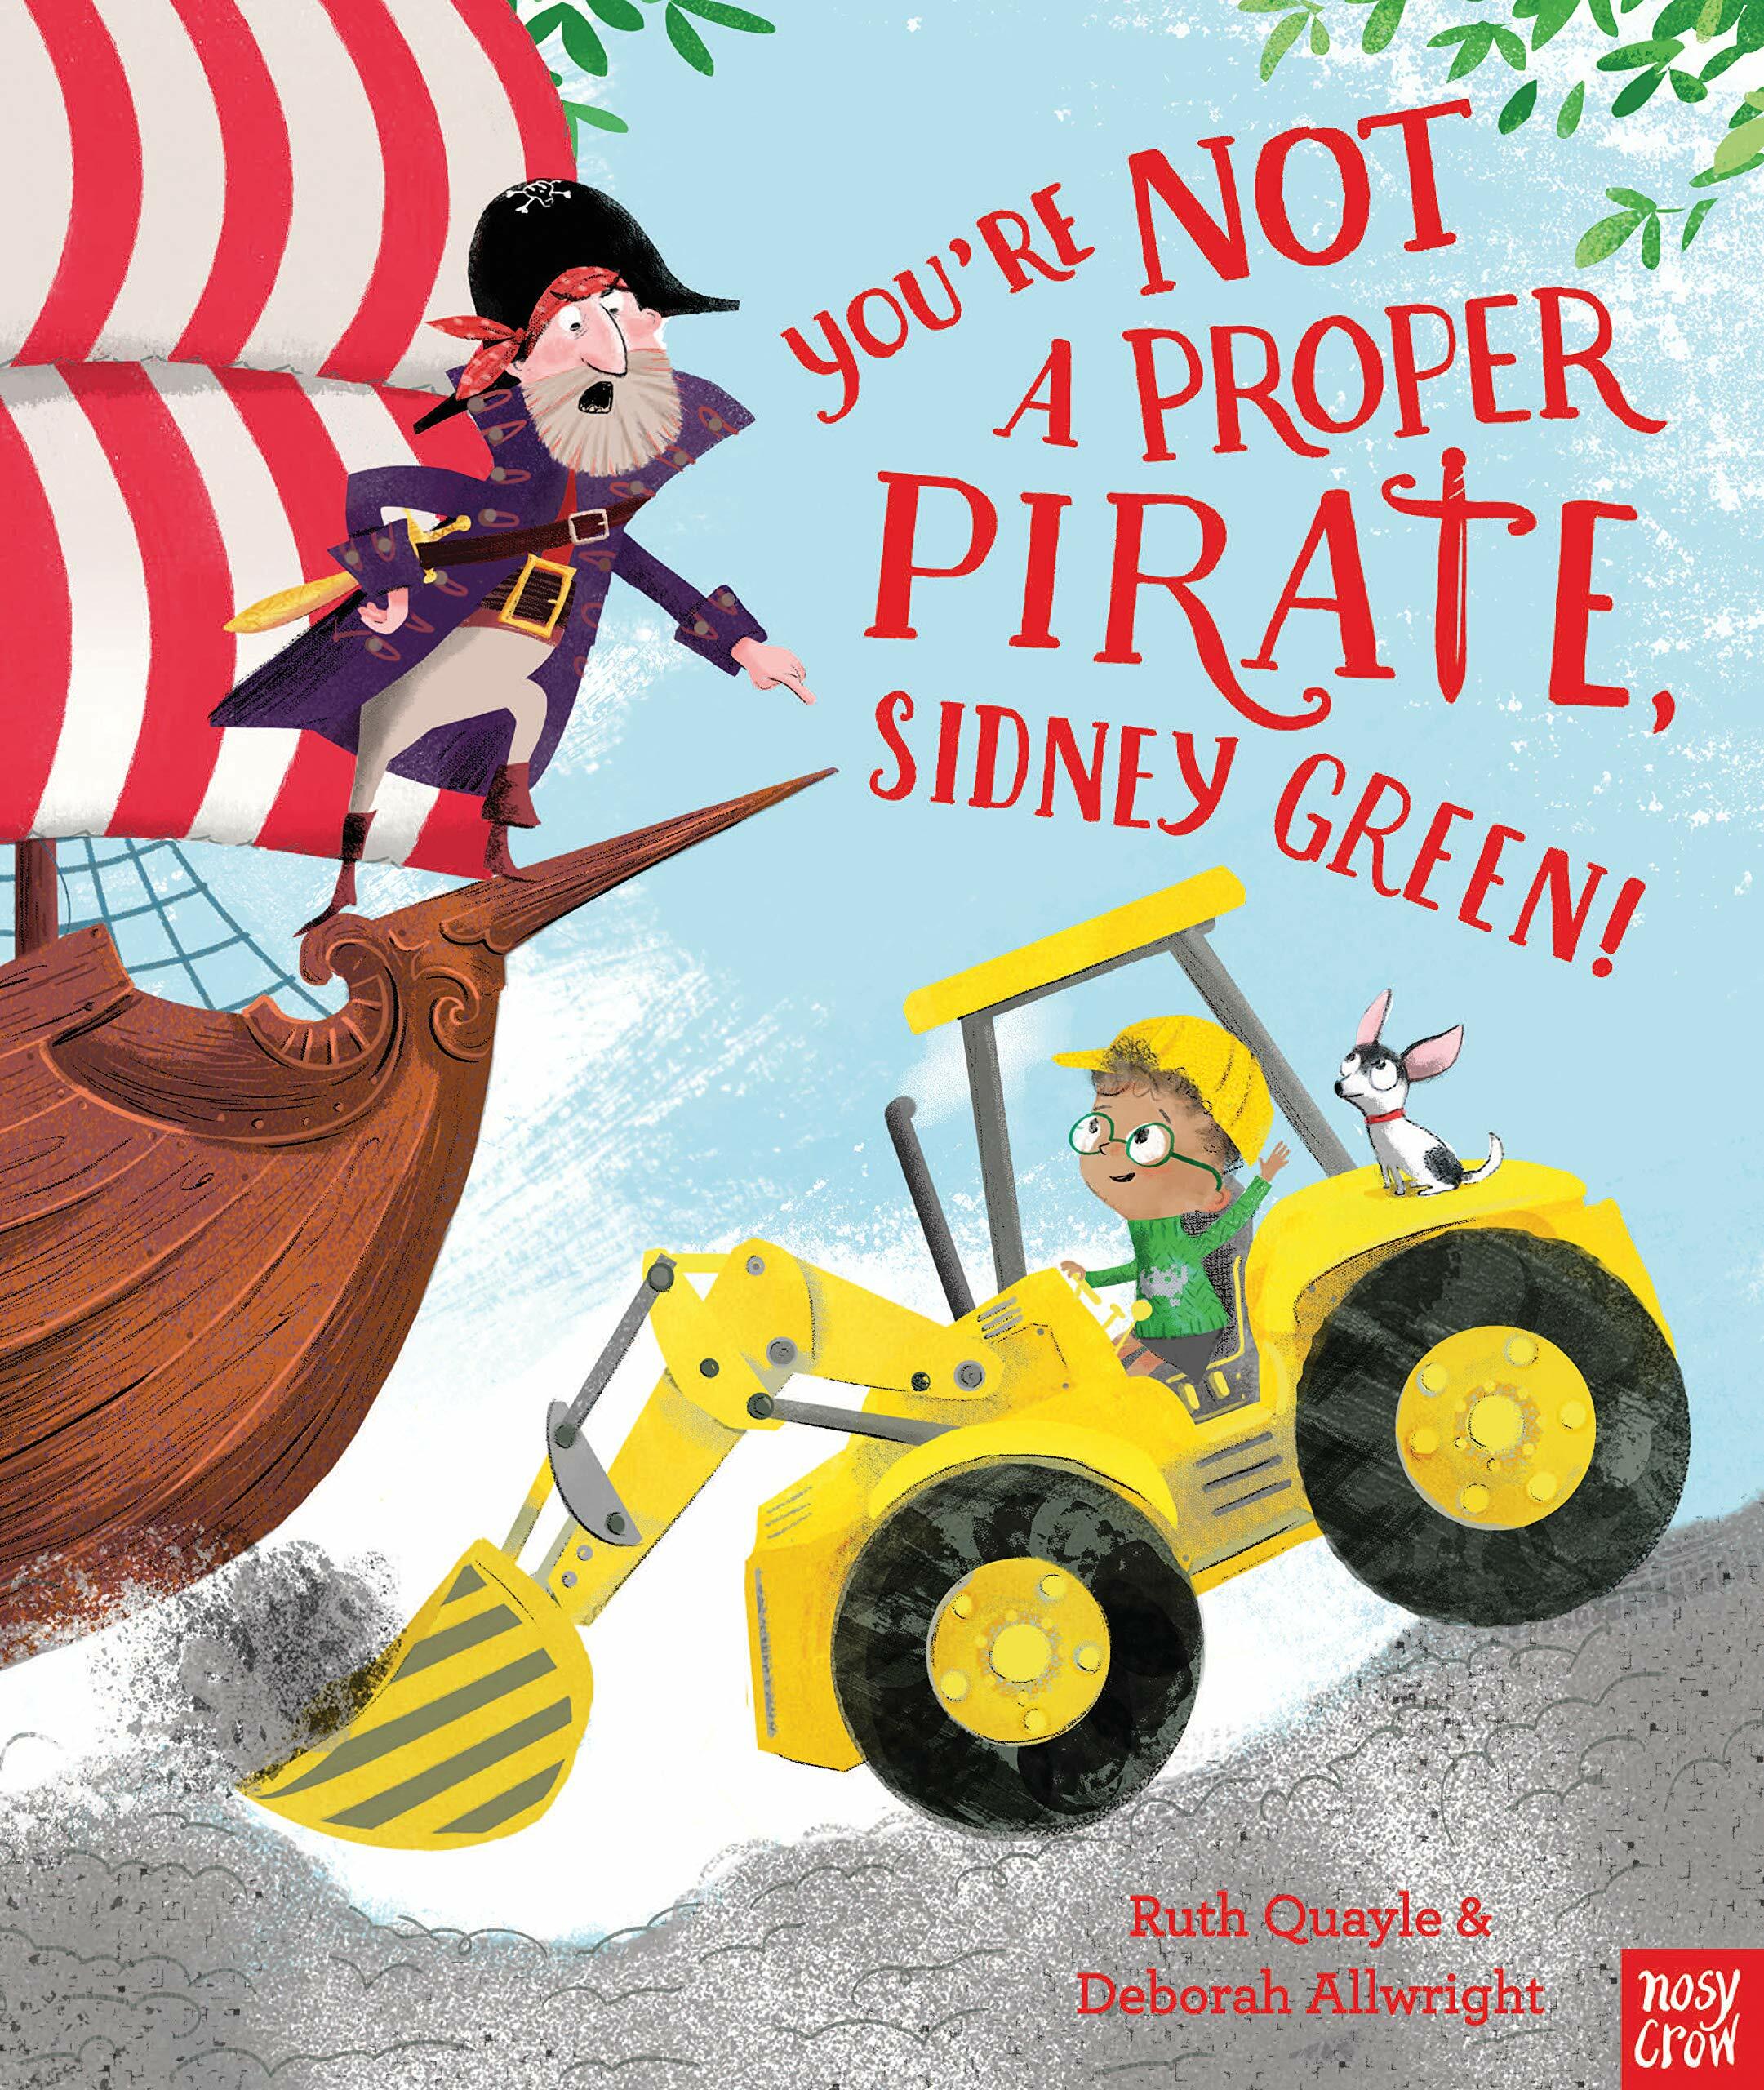 Youre Not a Proper Pirate, Sidney Green! (Paperback)